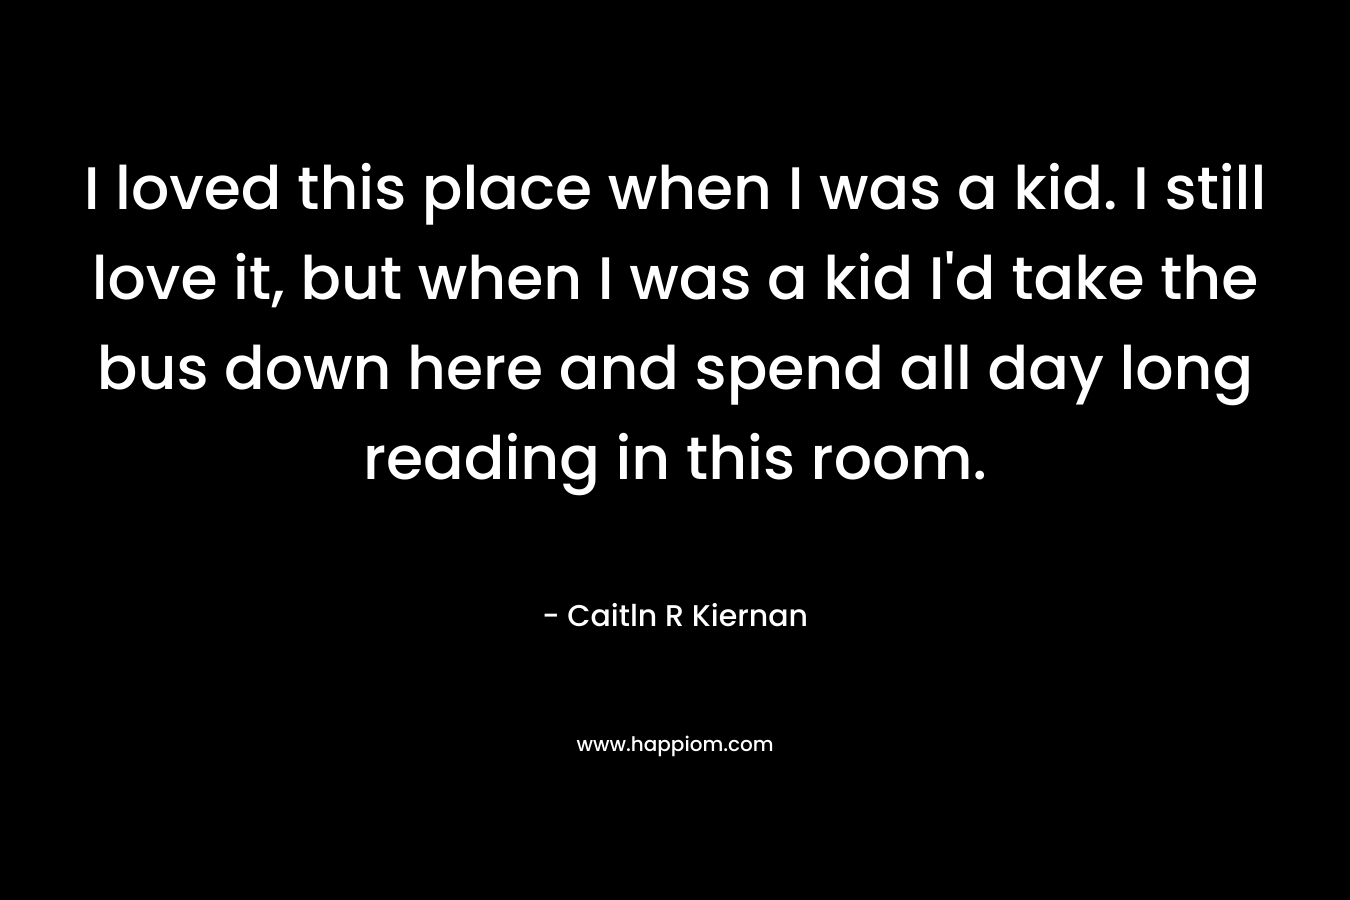 I loved this place when I was a kid. I still love it, but when I was a kid I’d take the bus down here and spend all day long reading in this room. – Caitln R Kiernan